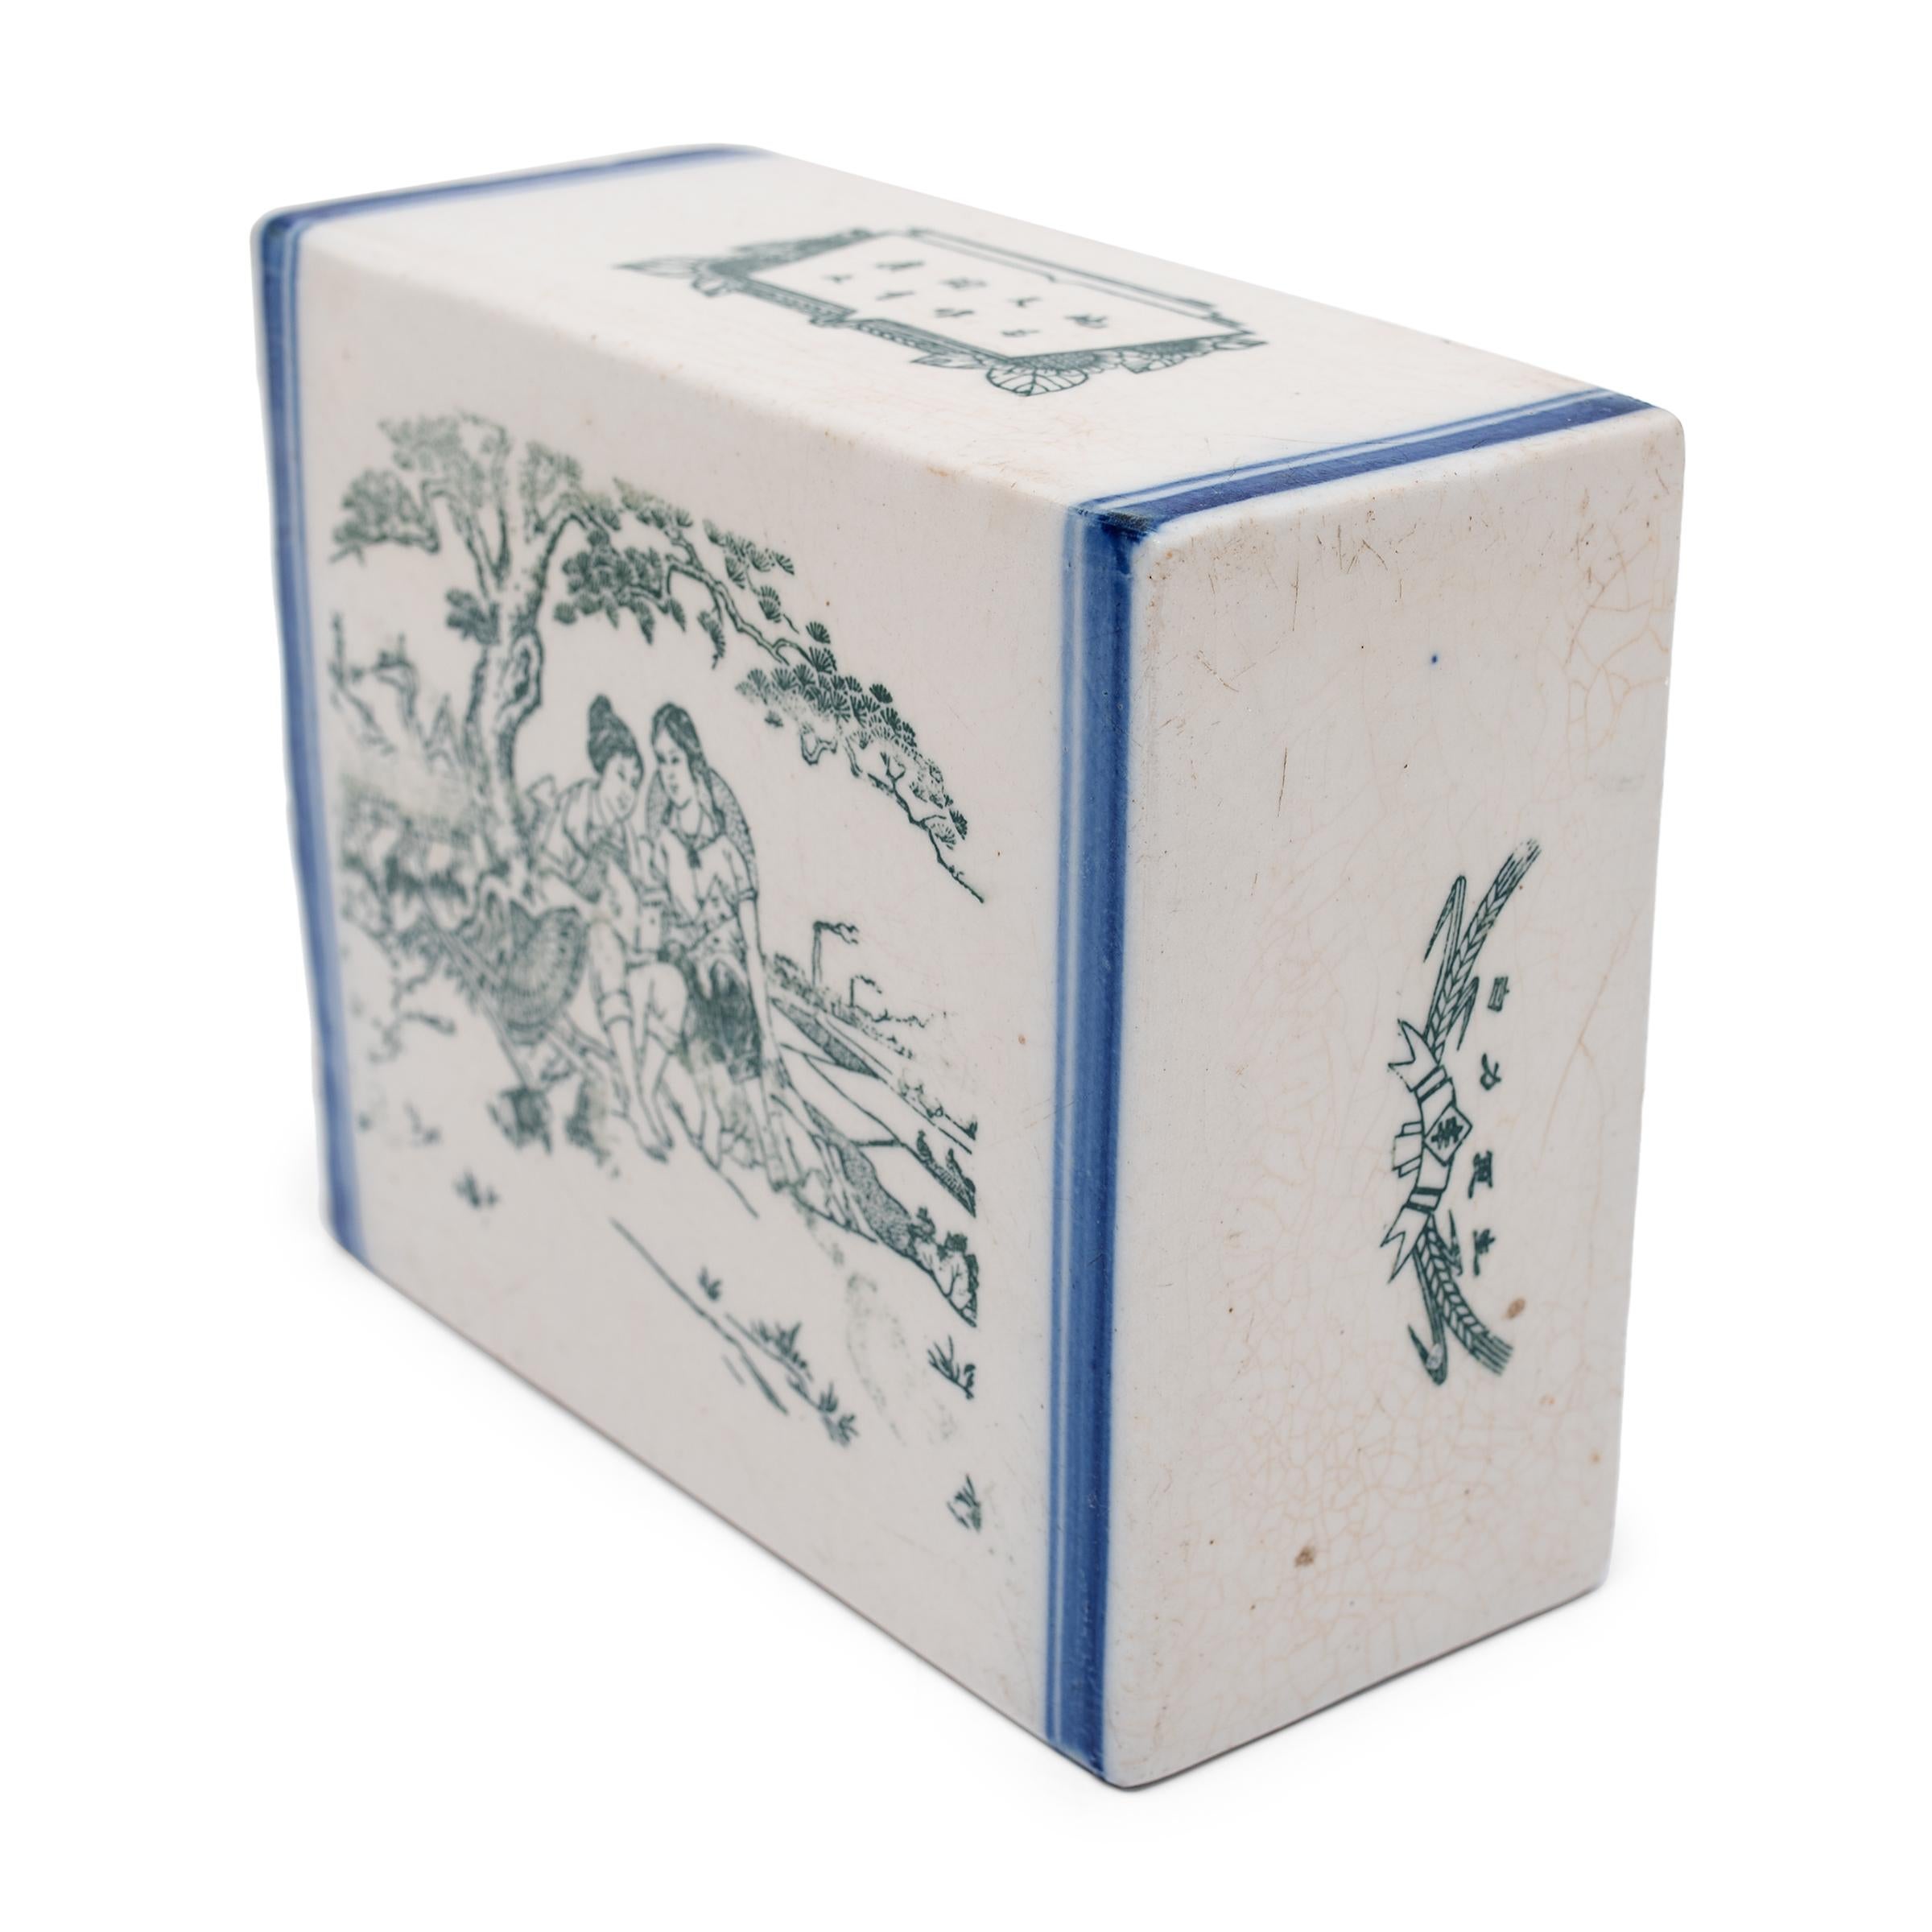 This square ceramic block is actually a form of Chinese headrest or neck pillow. Popular during the Qing dynasty, rigid headrests such as this were used by upper-class women to protect their elaborate hairstyles by elevating the head during slumber.